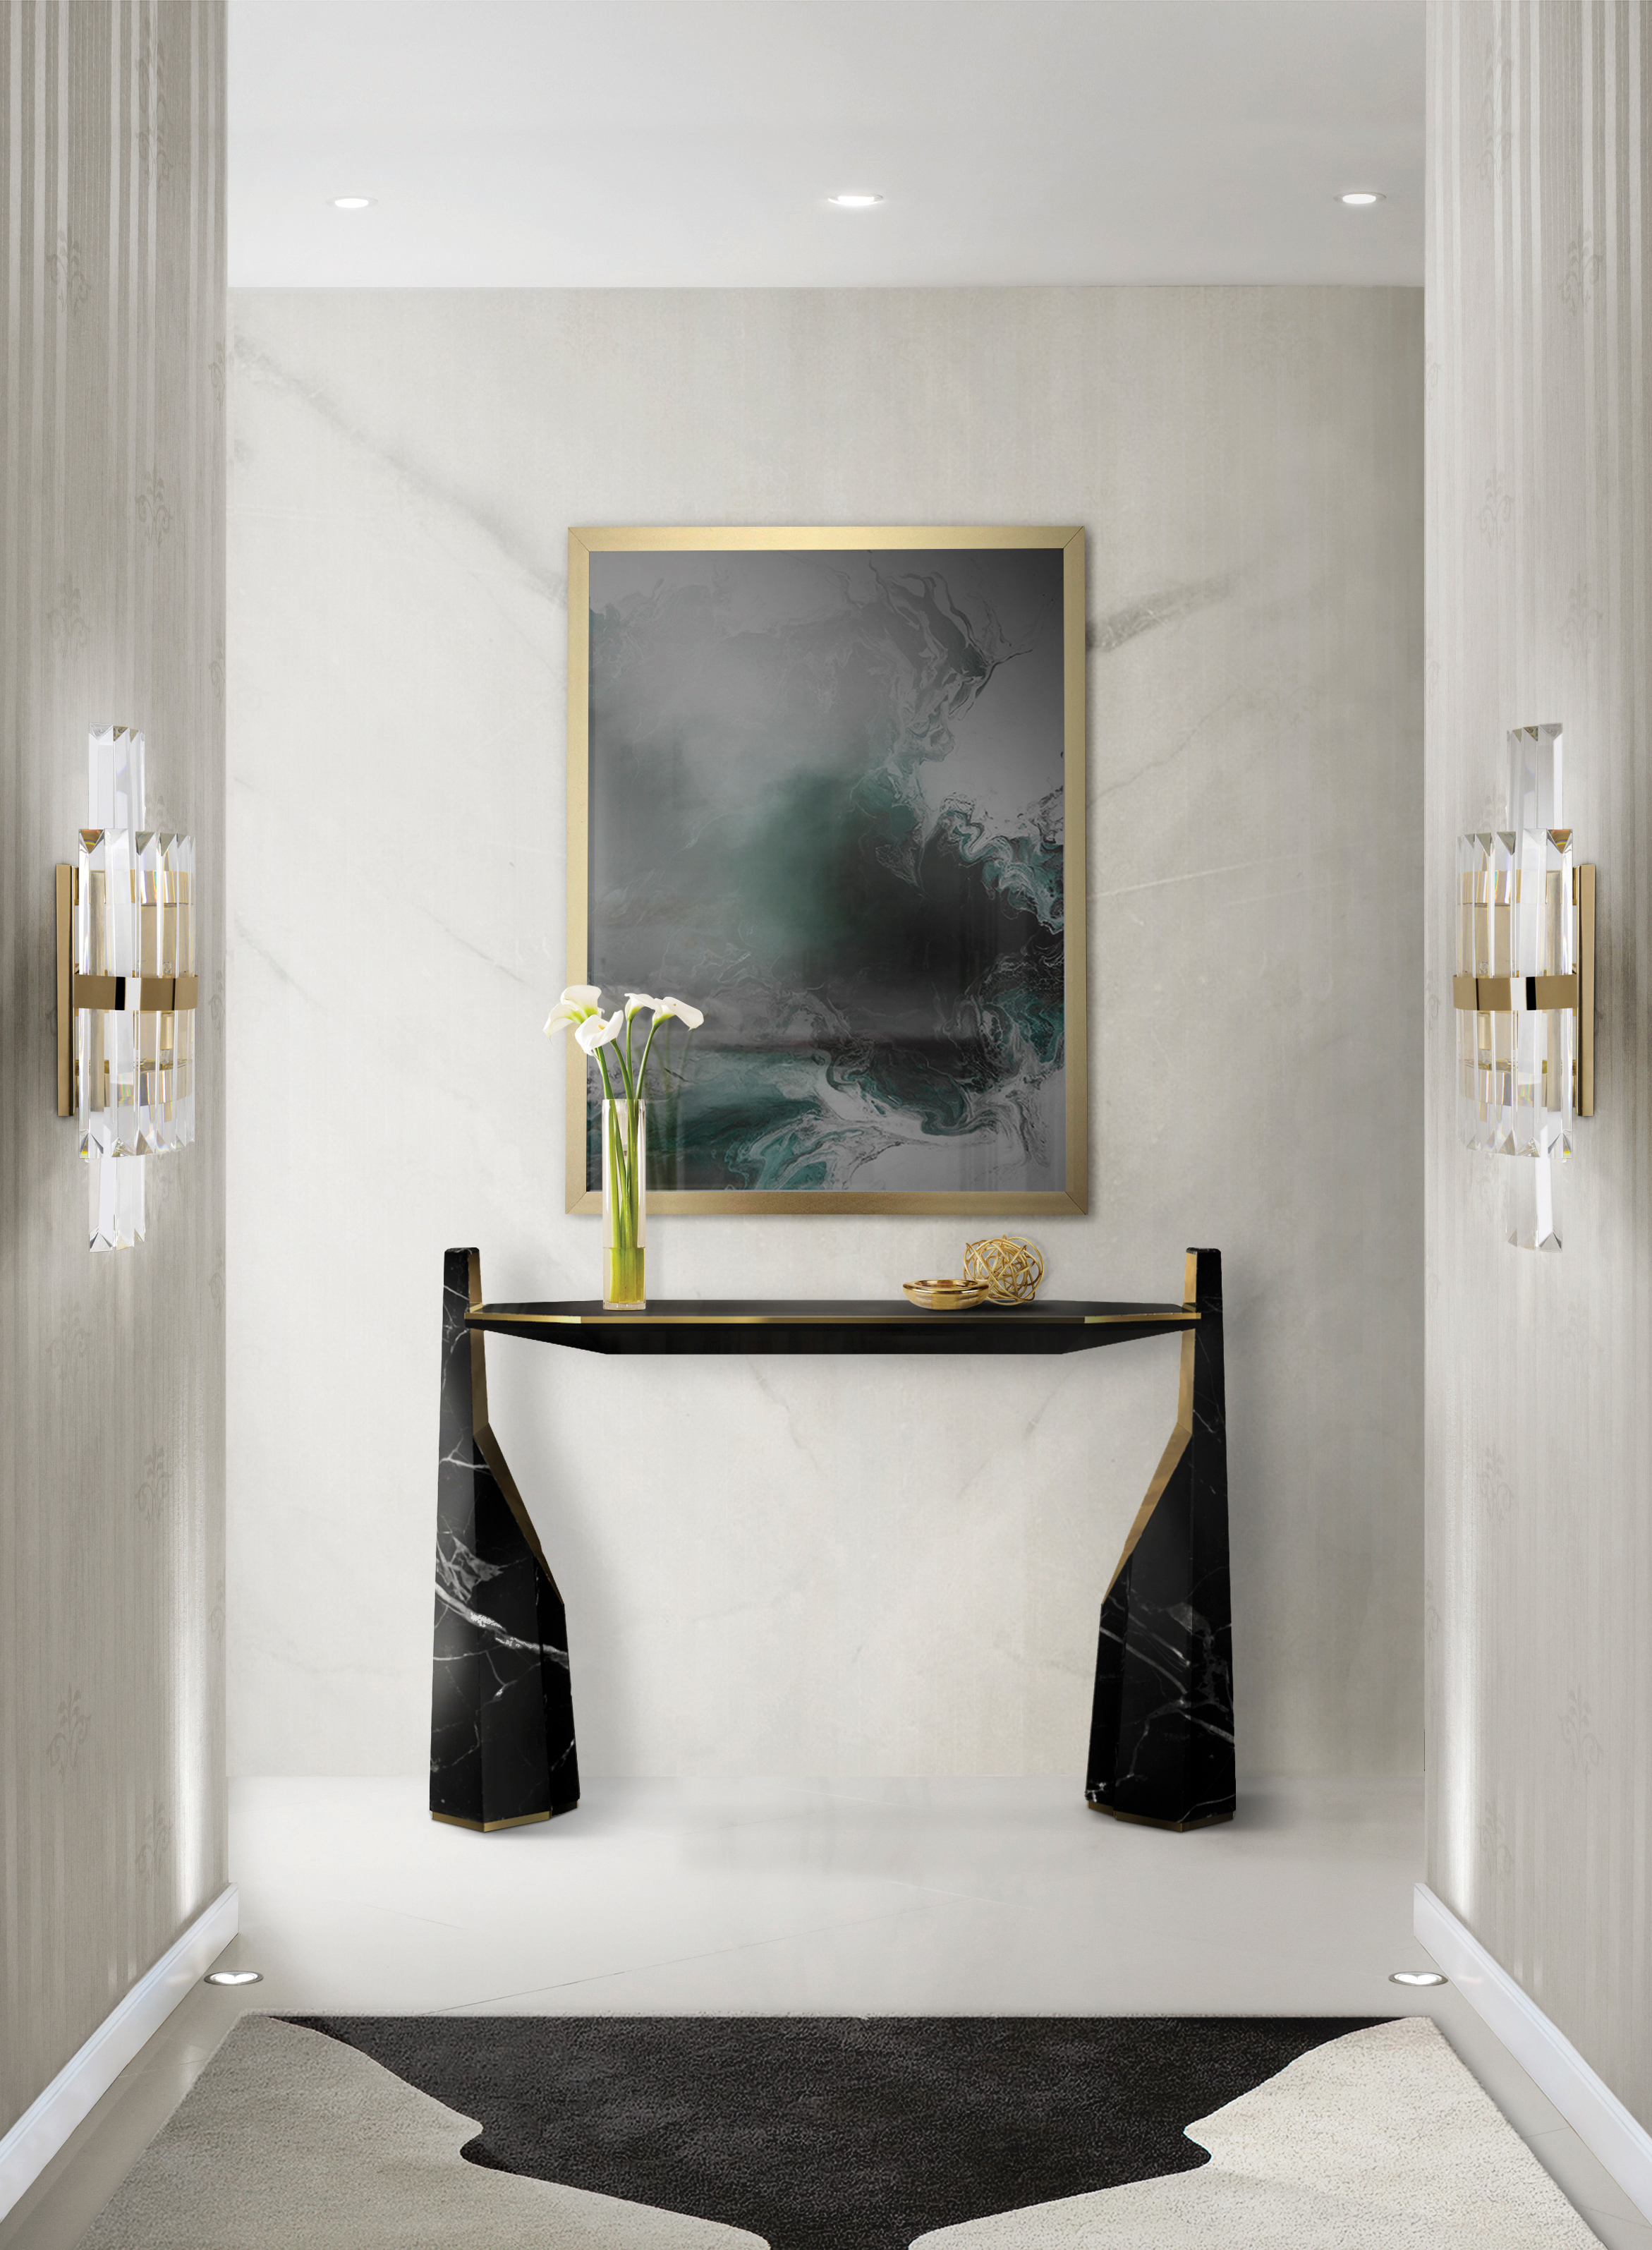 Luxury Interior Design - The Most Exquisite Console Selection